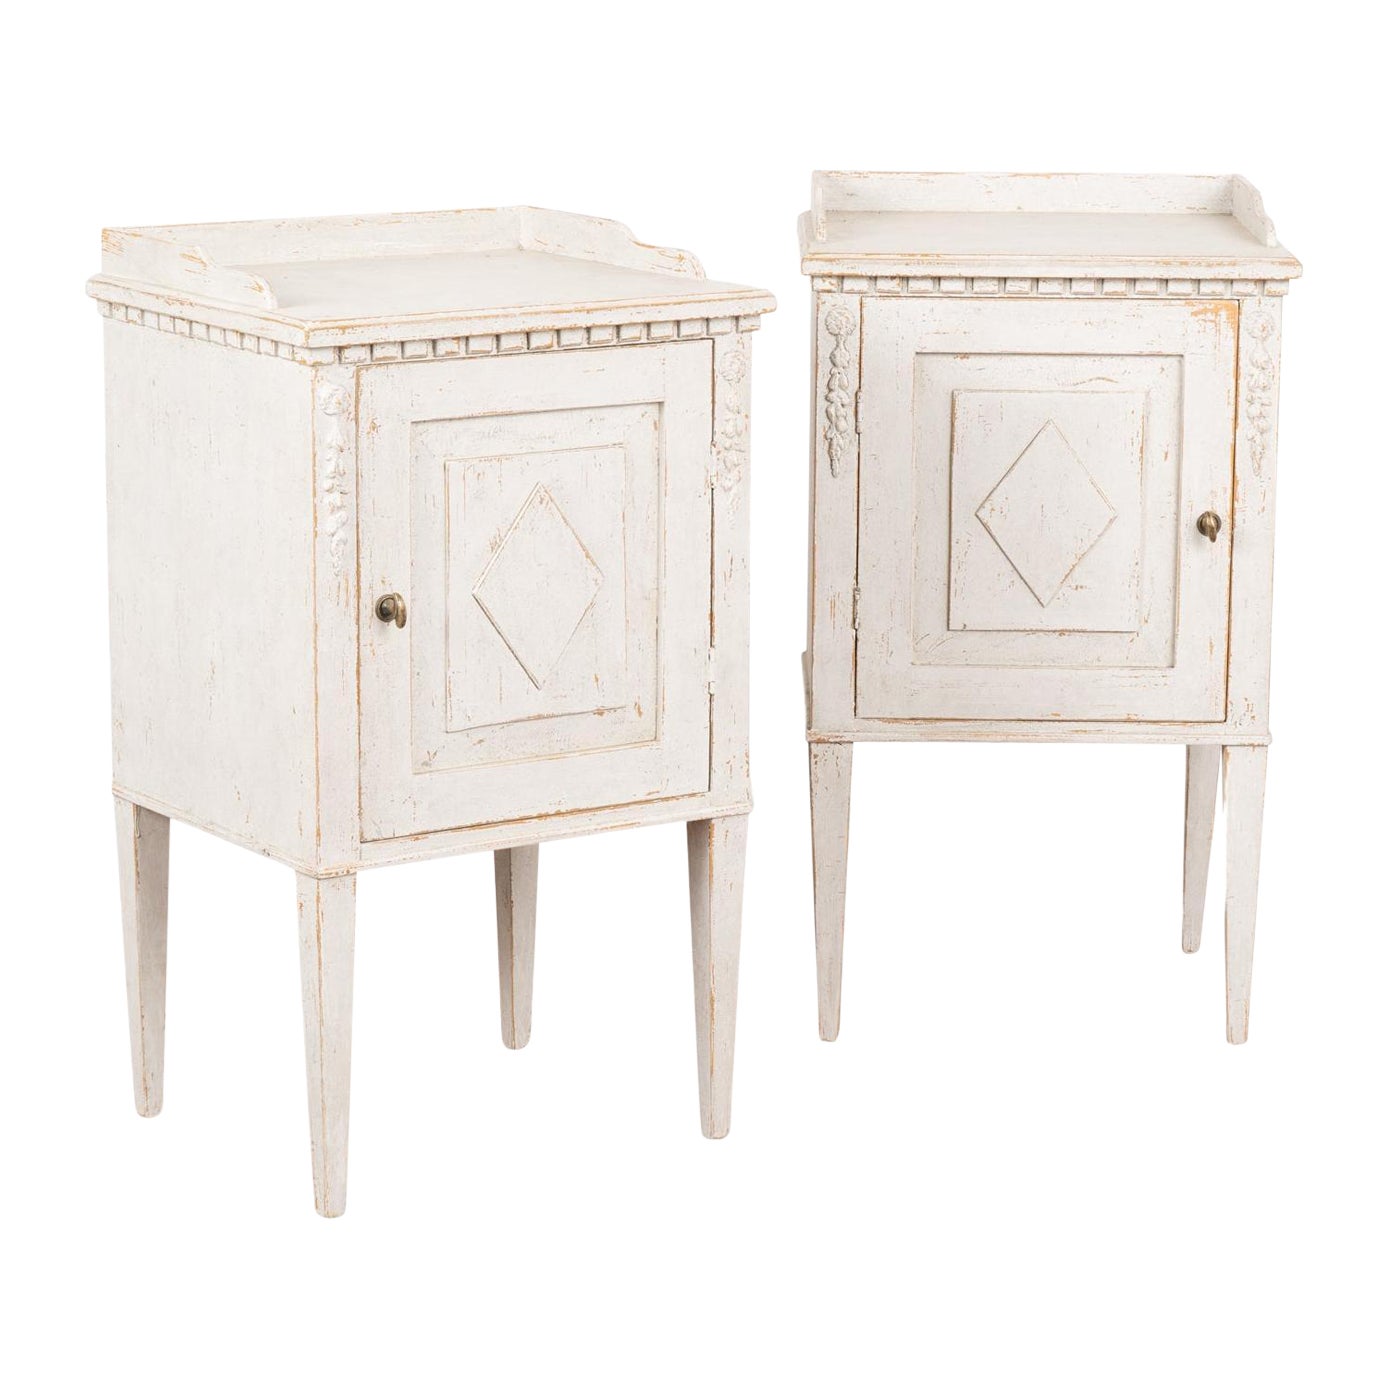 Pair, White painted Gustavian Nightstands Side Tables, Sweden circa 1880-90